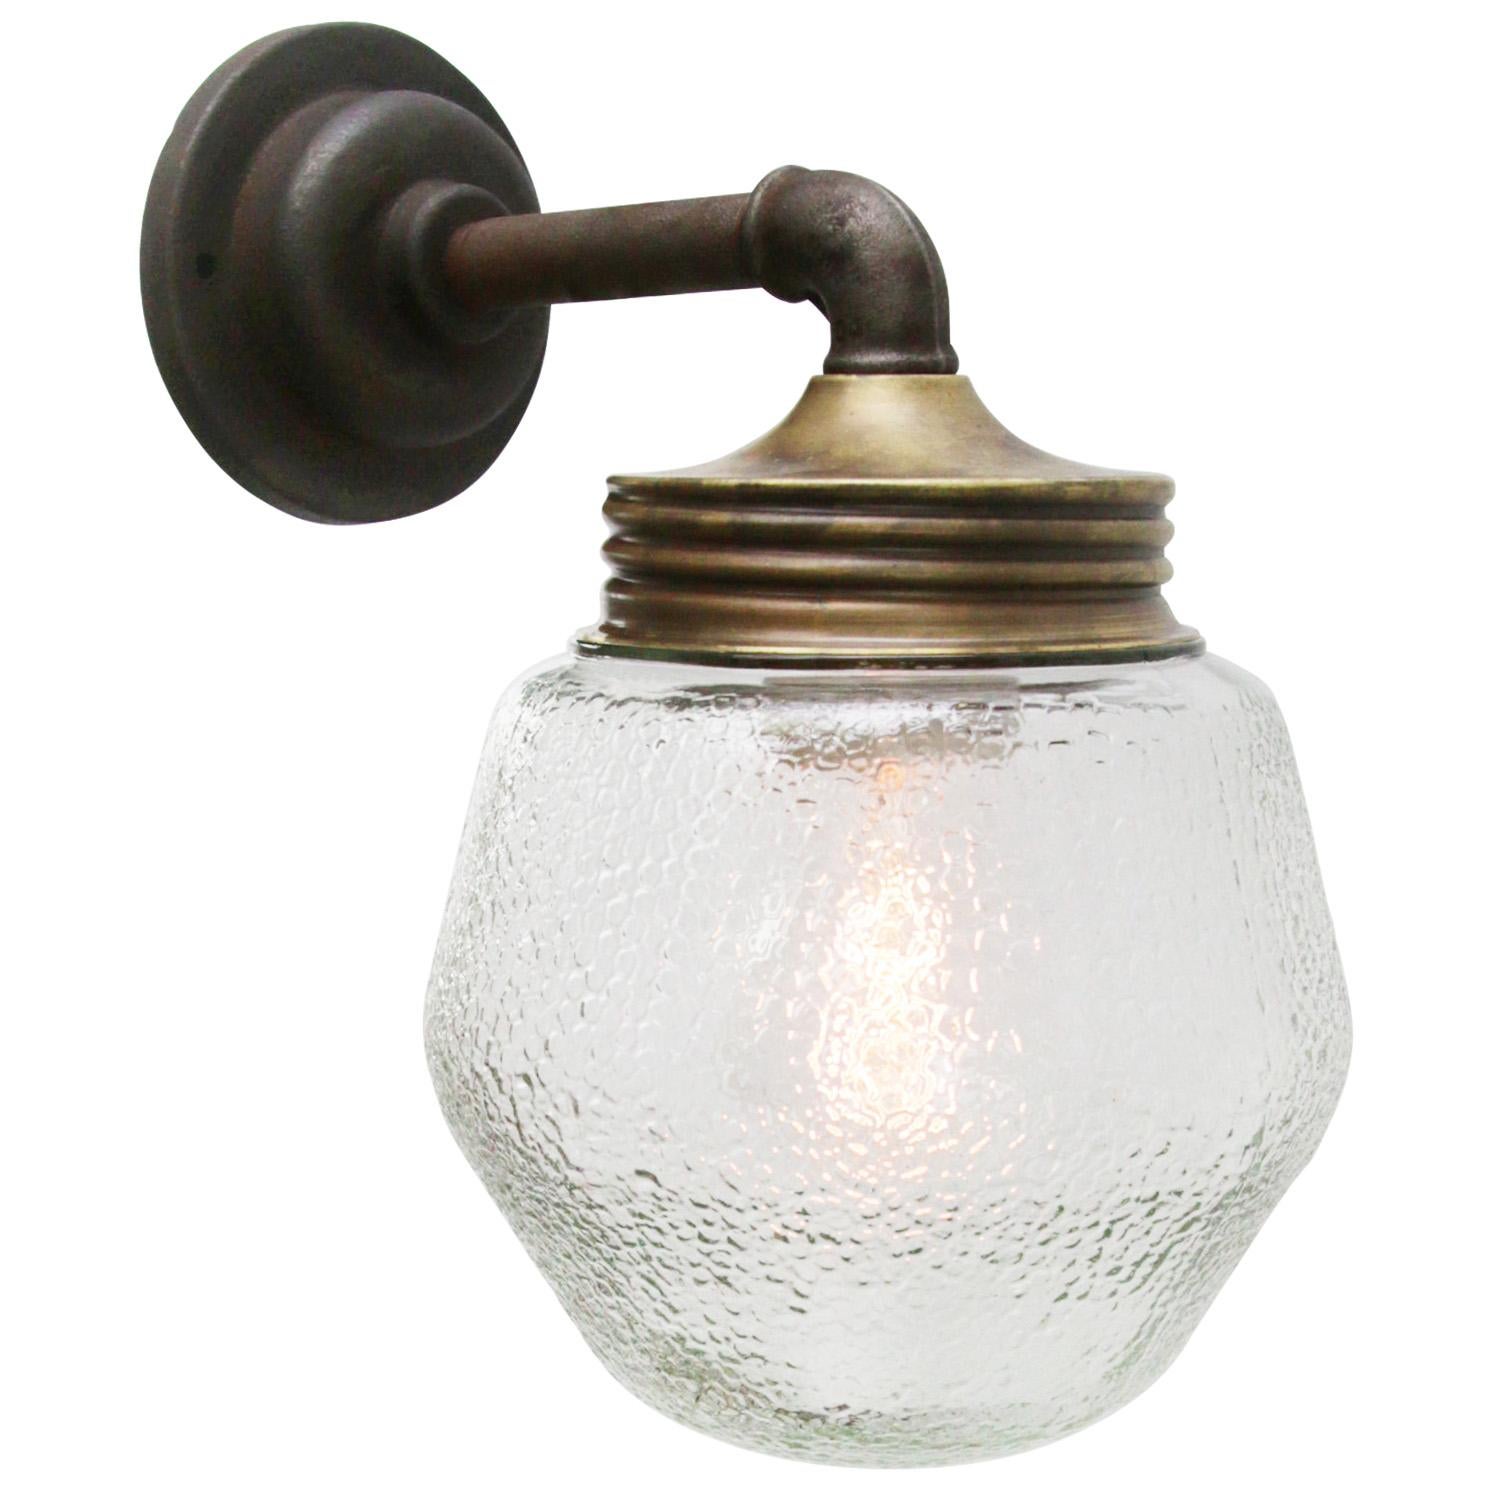 Industrial wall lamp.
Brass and cast iron
Frosted glass.

Diameter cast iron wall piece 10.5 cm / 4”.
2 holes to secure.

Weight: 1.95 kg / 4.3 lb

Priced per individual item. All lamps have been made suitable by international standards for